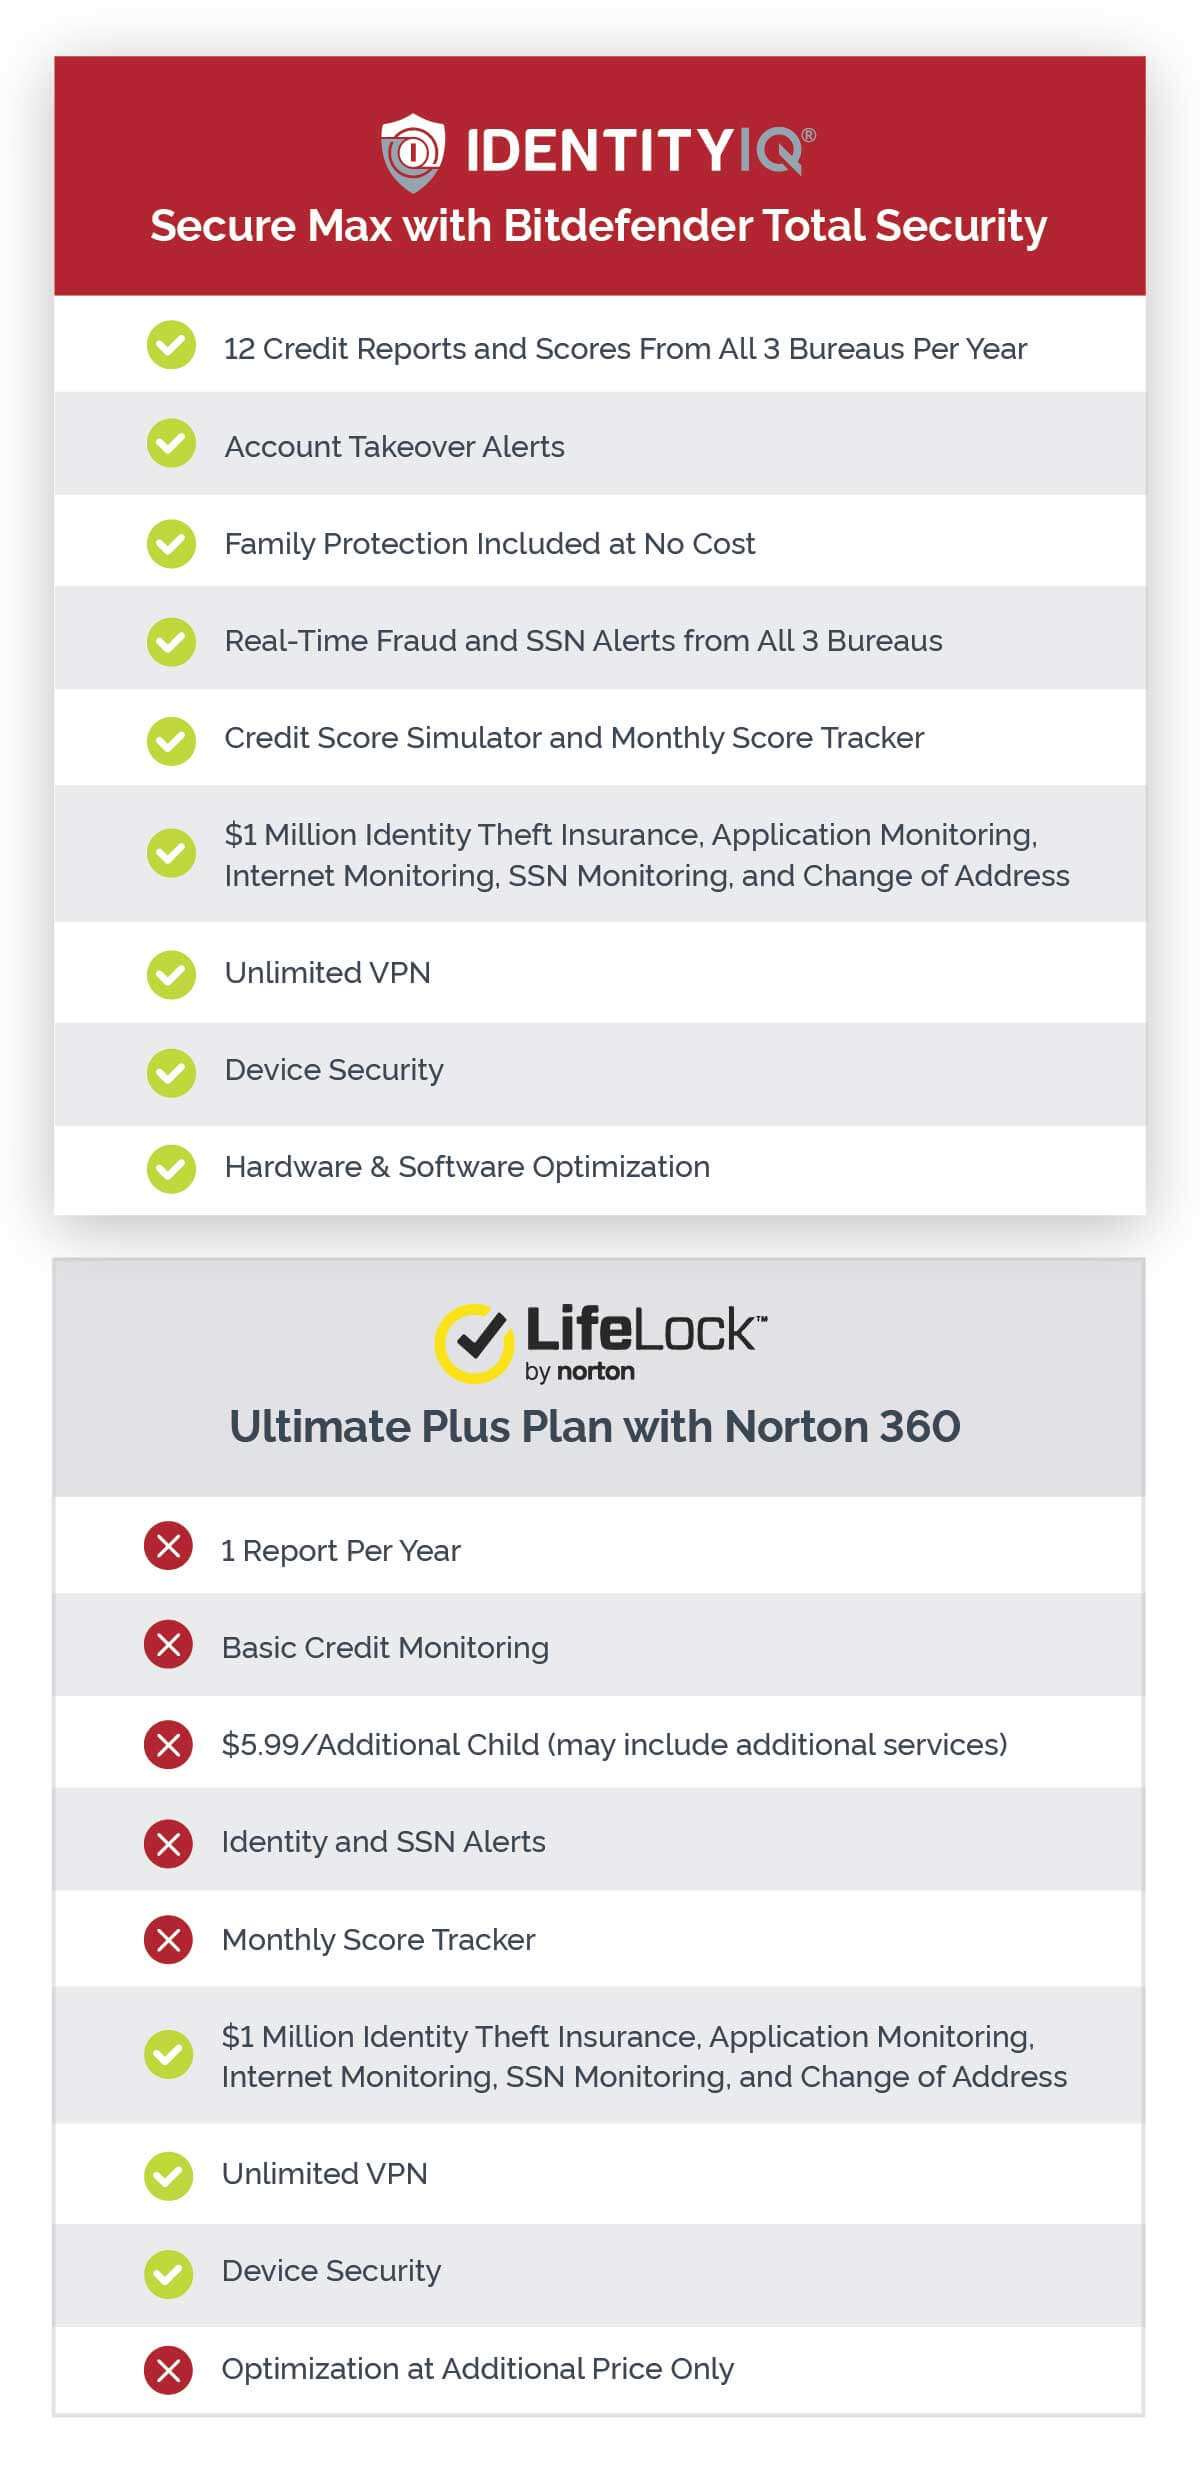 Price plans for IdentityIQ and Lifelock.